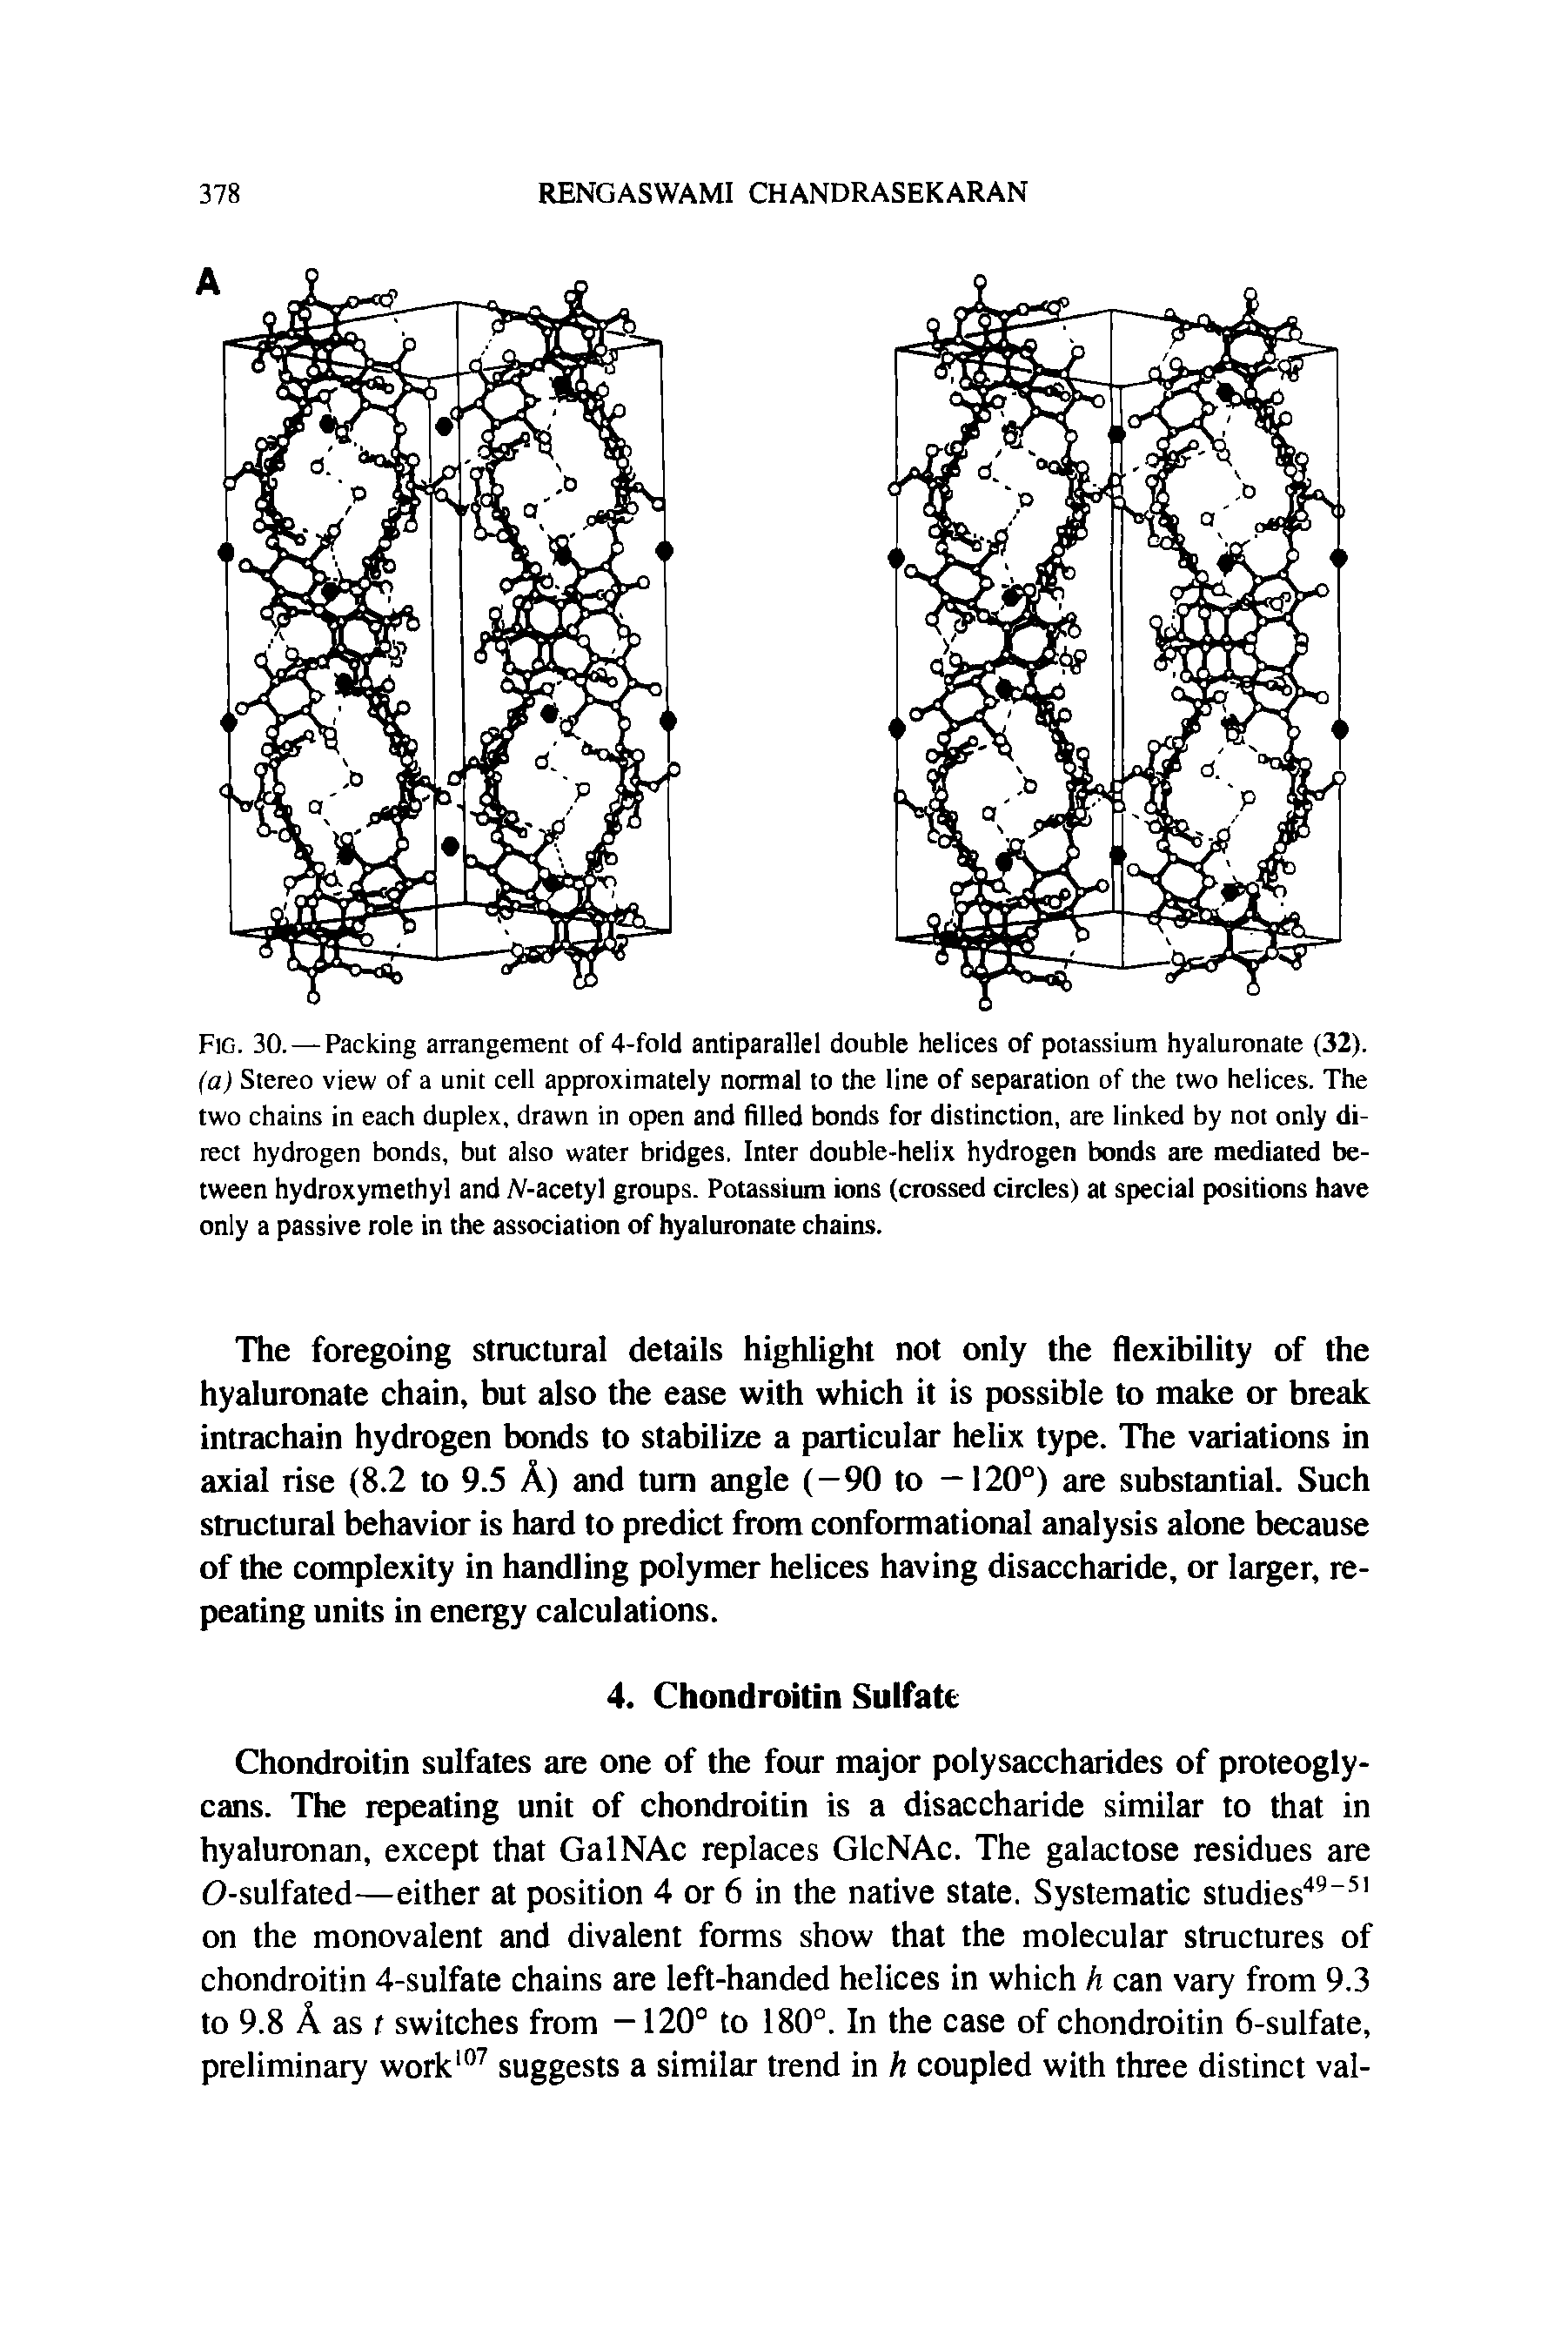 Fig. 30. — Packing arrangement of 4-fold antiparallel double helices of potassium hyaluronate (32). (a) Stereo view of a unit cell approximately normal to the line of separation of the two helices. The two chains in each duplex, drawn in open and filled bonds for distinction, are linked by not only direct hydrogen bonds, but also water bridges. Inter double-helix hydrogen bonds are mediated between hydroxymethyl and iV-acetyl groups. Potassium ions (crossed circles) at special positions have only a passive role in the association of hyaluronate chains.